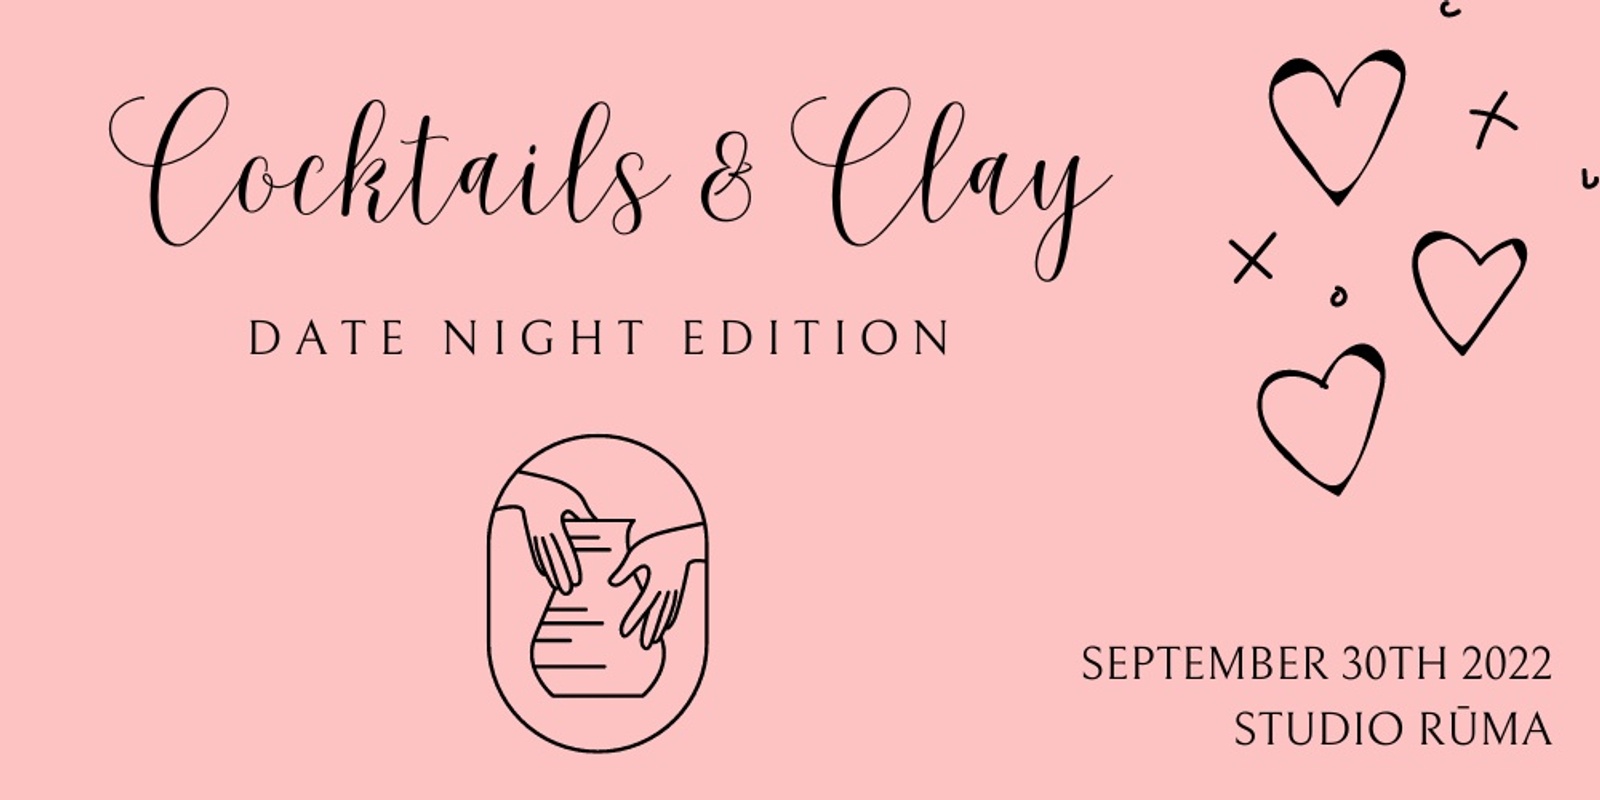 Banner image for Cocktails and Clay | Date Night